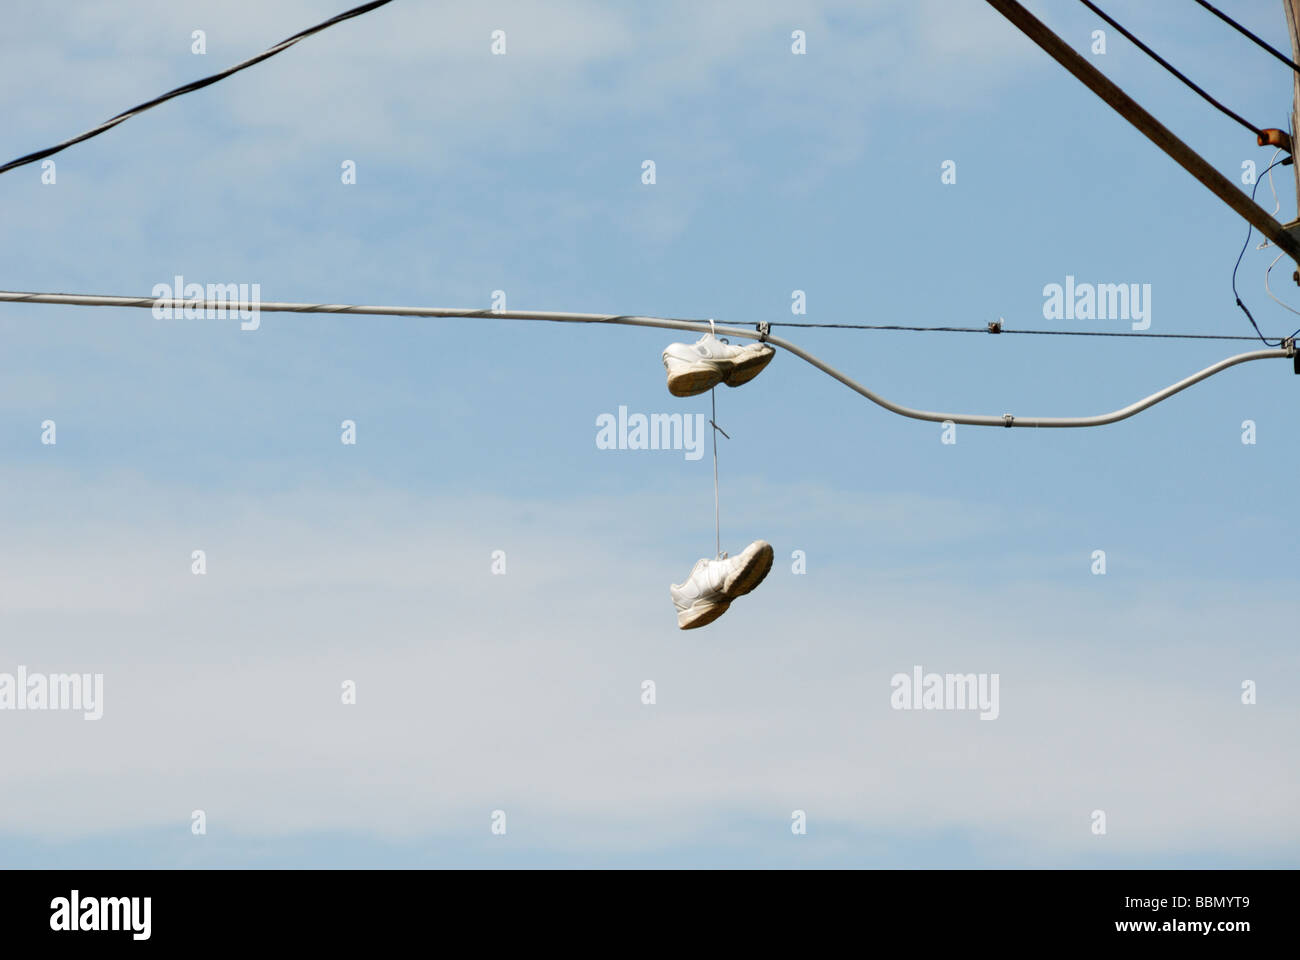 pair of tennis shoes hanging on a telephone wire Stock Photo